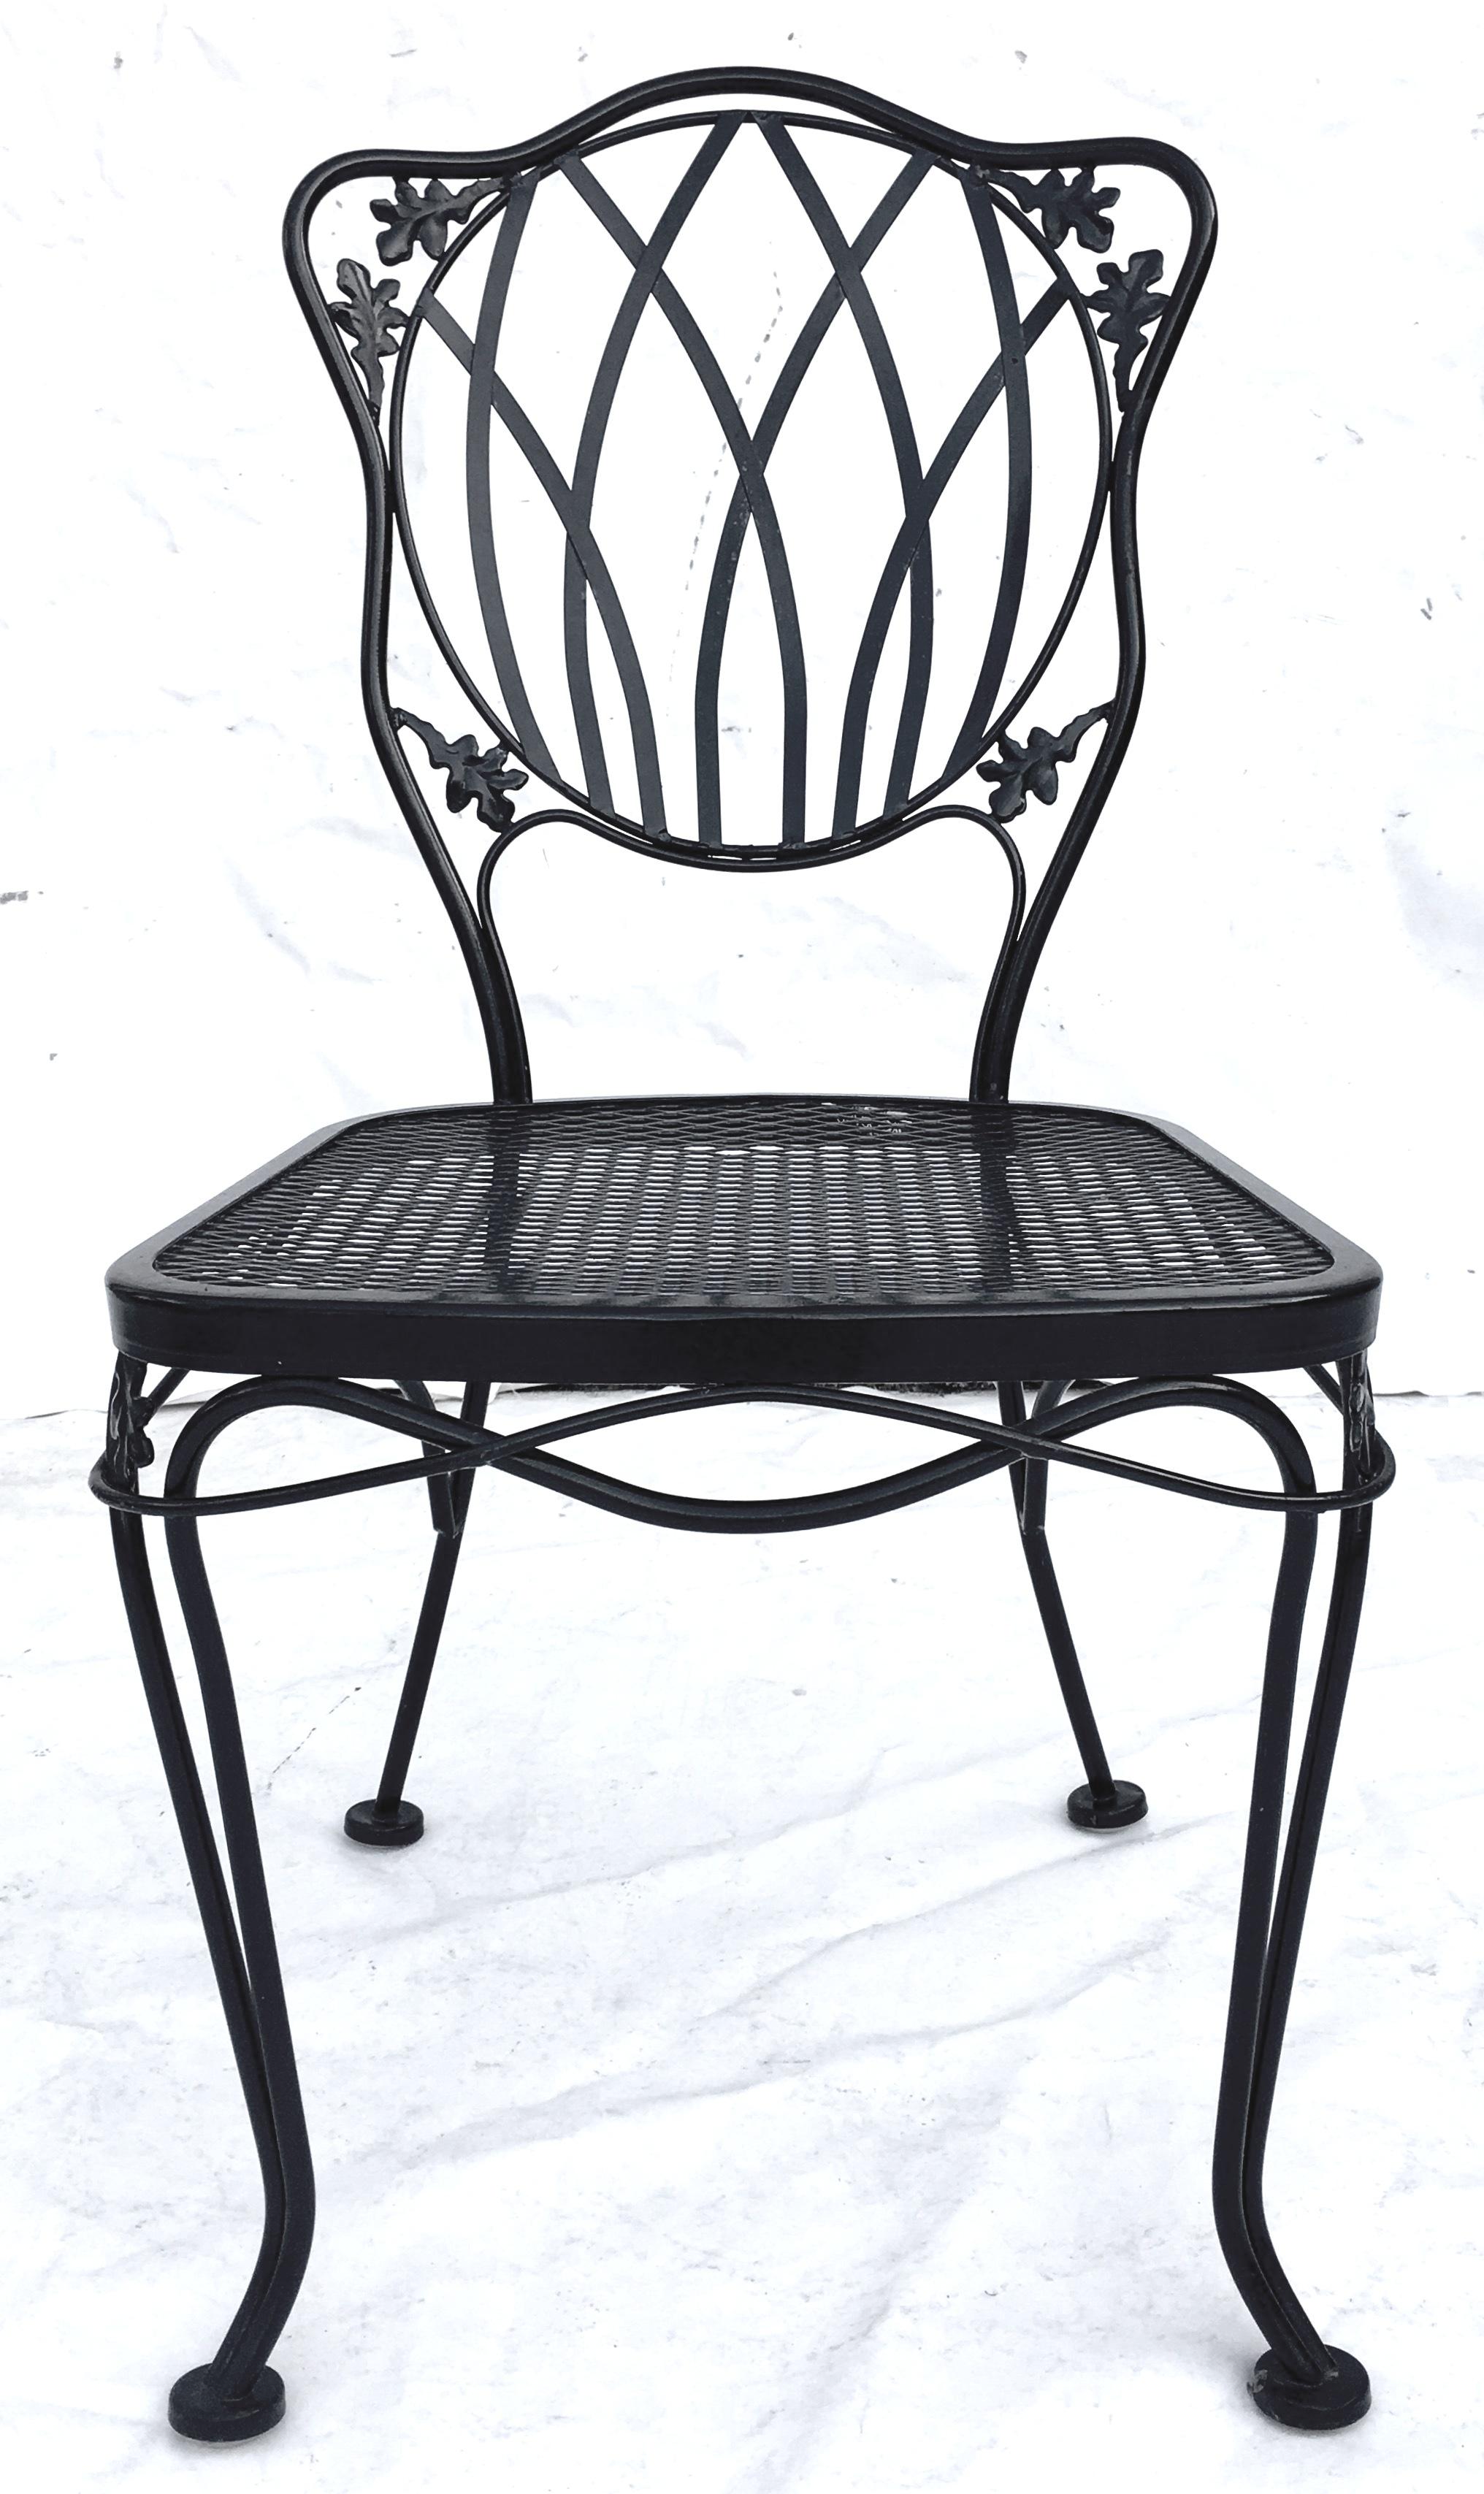 Mid-Century Modern 1950'S Wrought Iron Mesh Floral & Vine Chairs By Woodard-S/5 For Sale